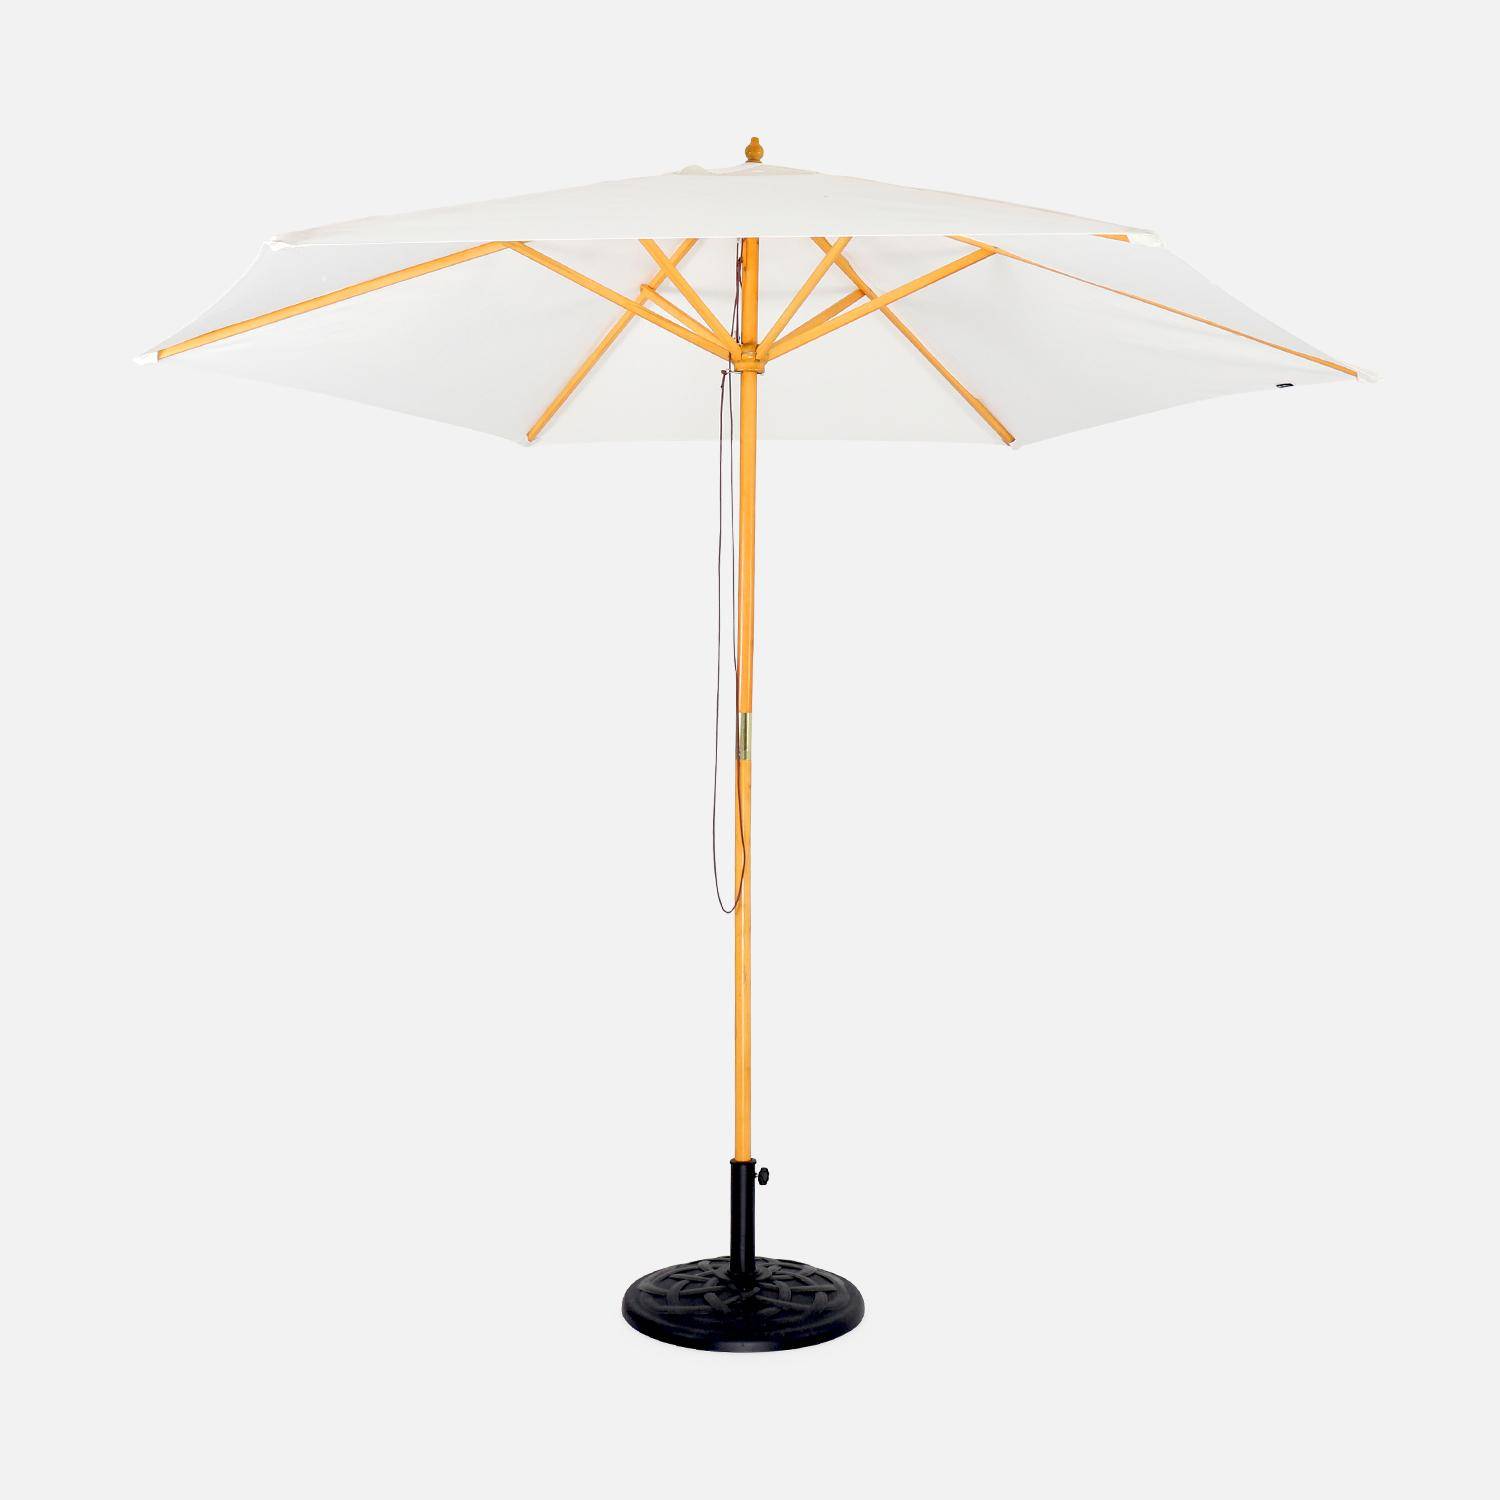 Round wooden parasol Ø300cm with straight pole -  adjustable aluminium central mast in wood and crank handle opening - Cabourg - Off-white Photo1